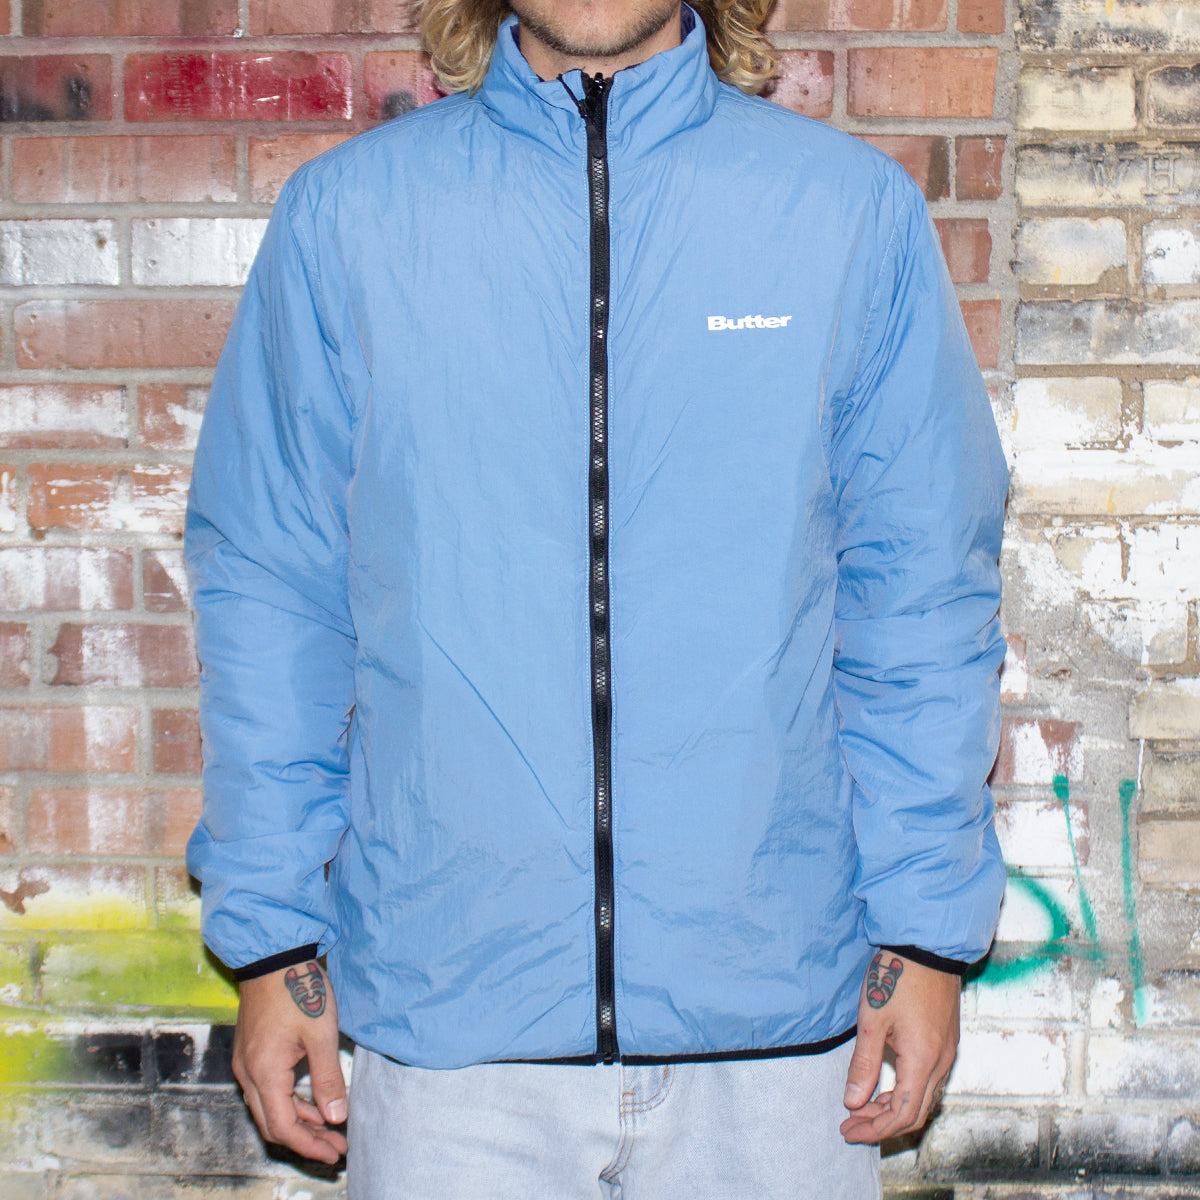 Jockey Outdoors™ Reversible Quilted Jacket